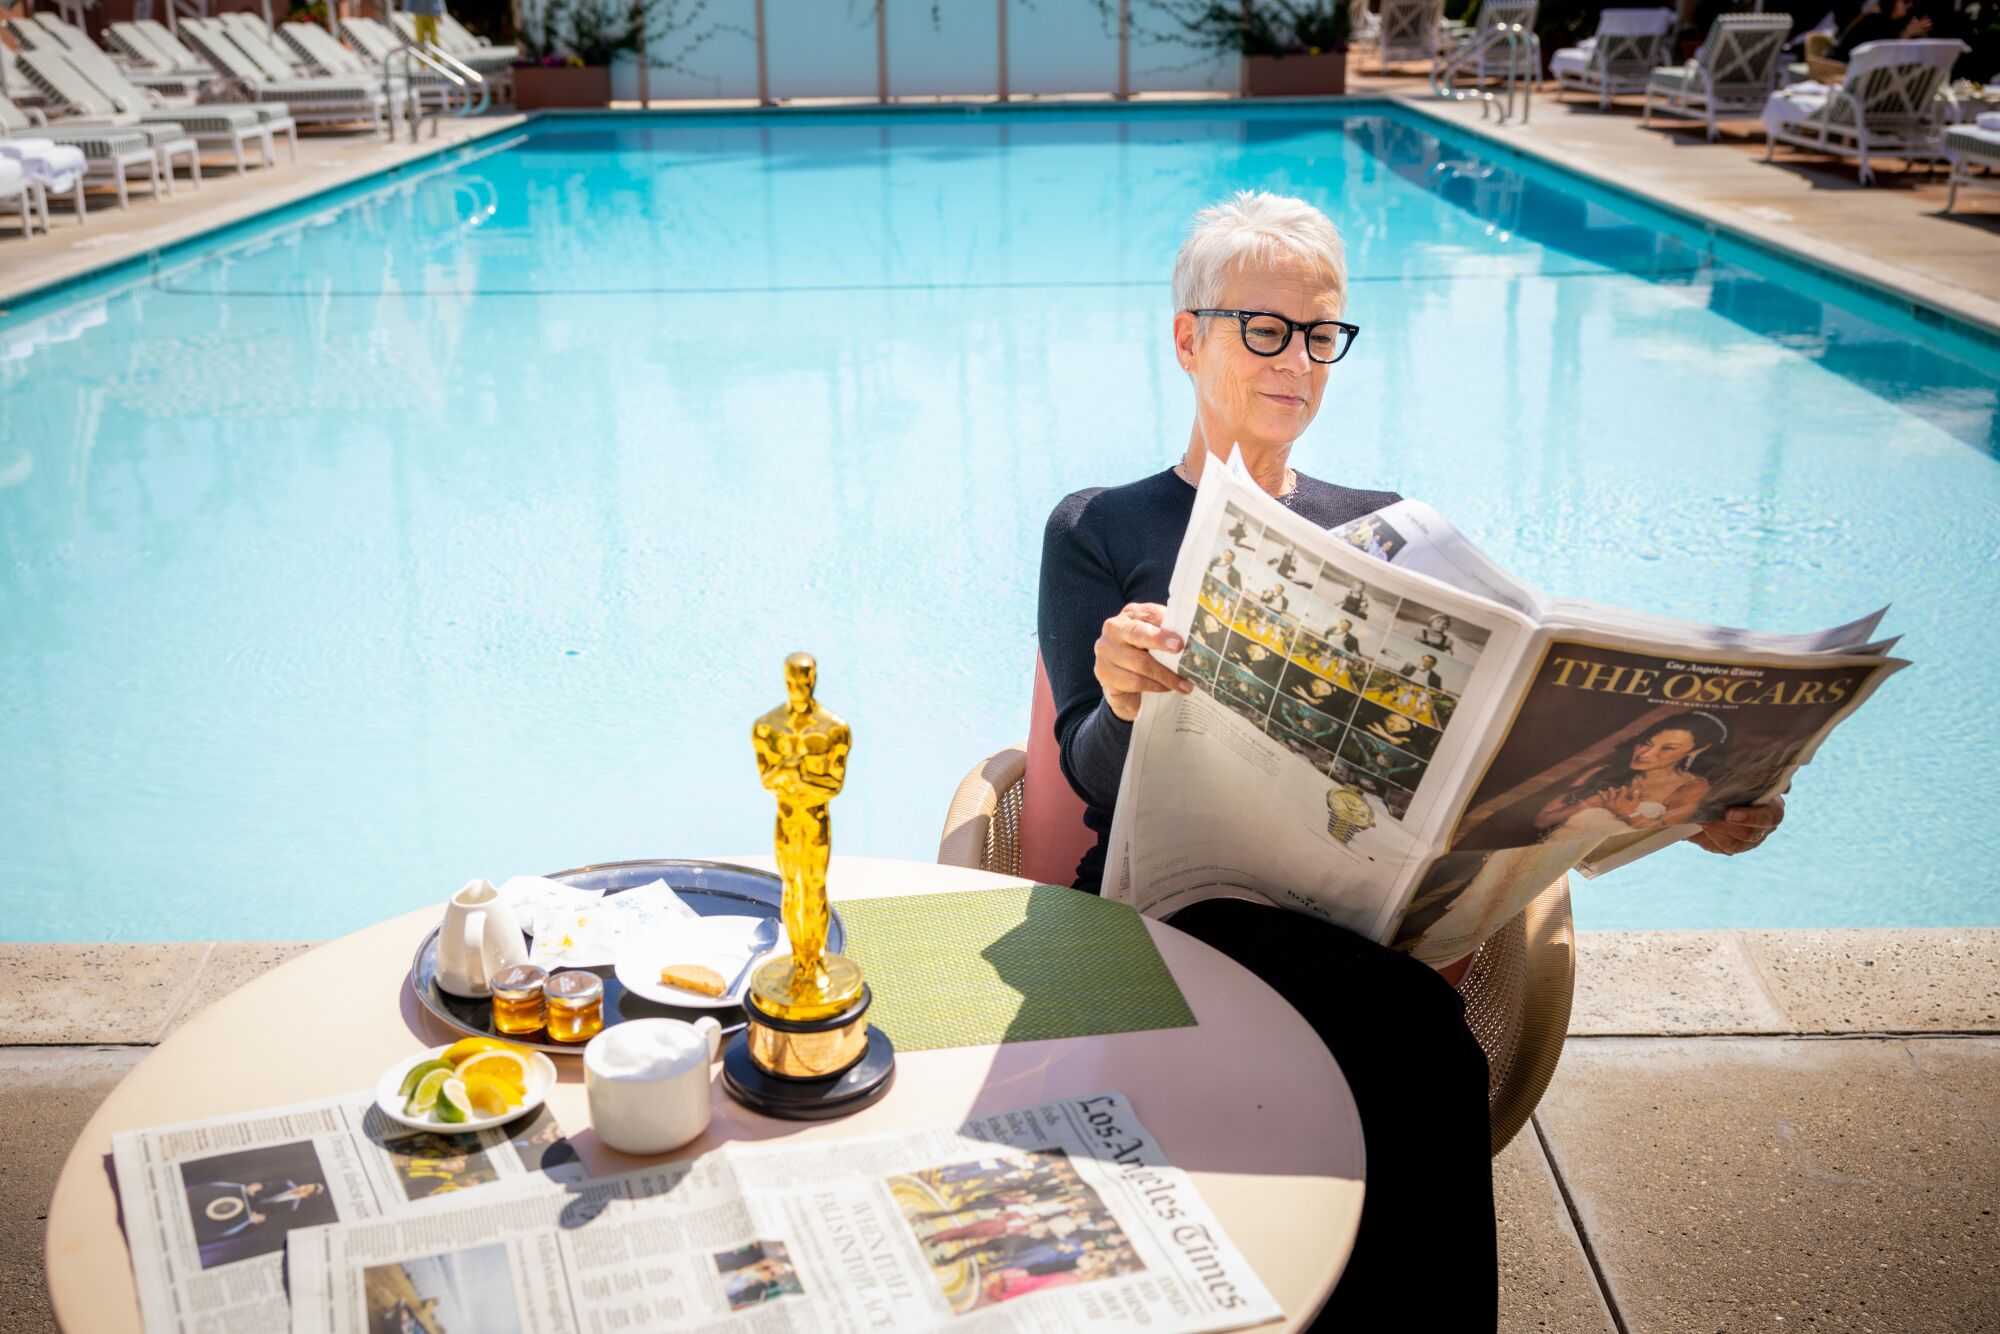 A woman with glasses looks at a newspaper section.  Her Oscar is on the table.